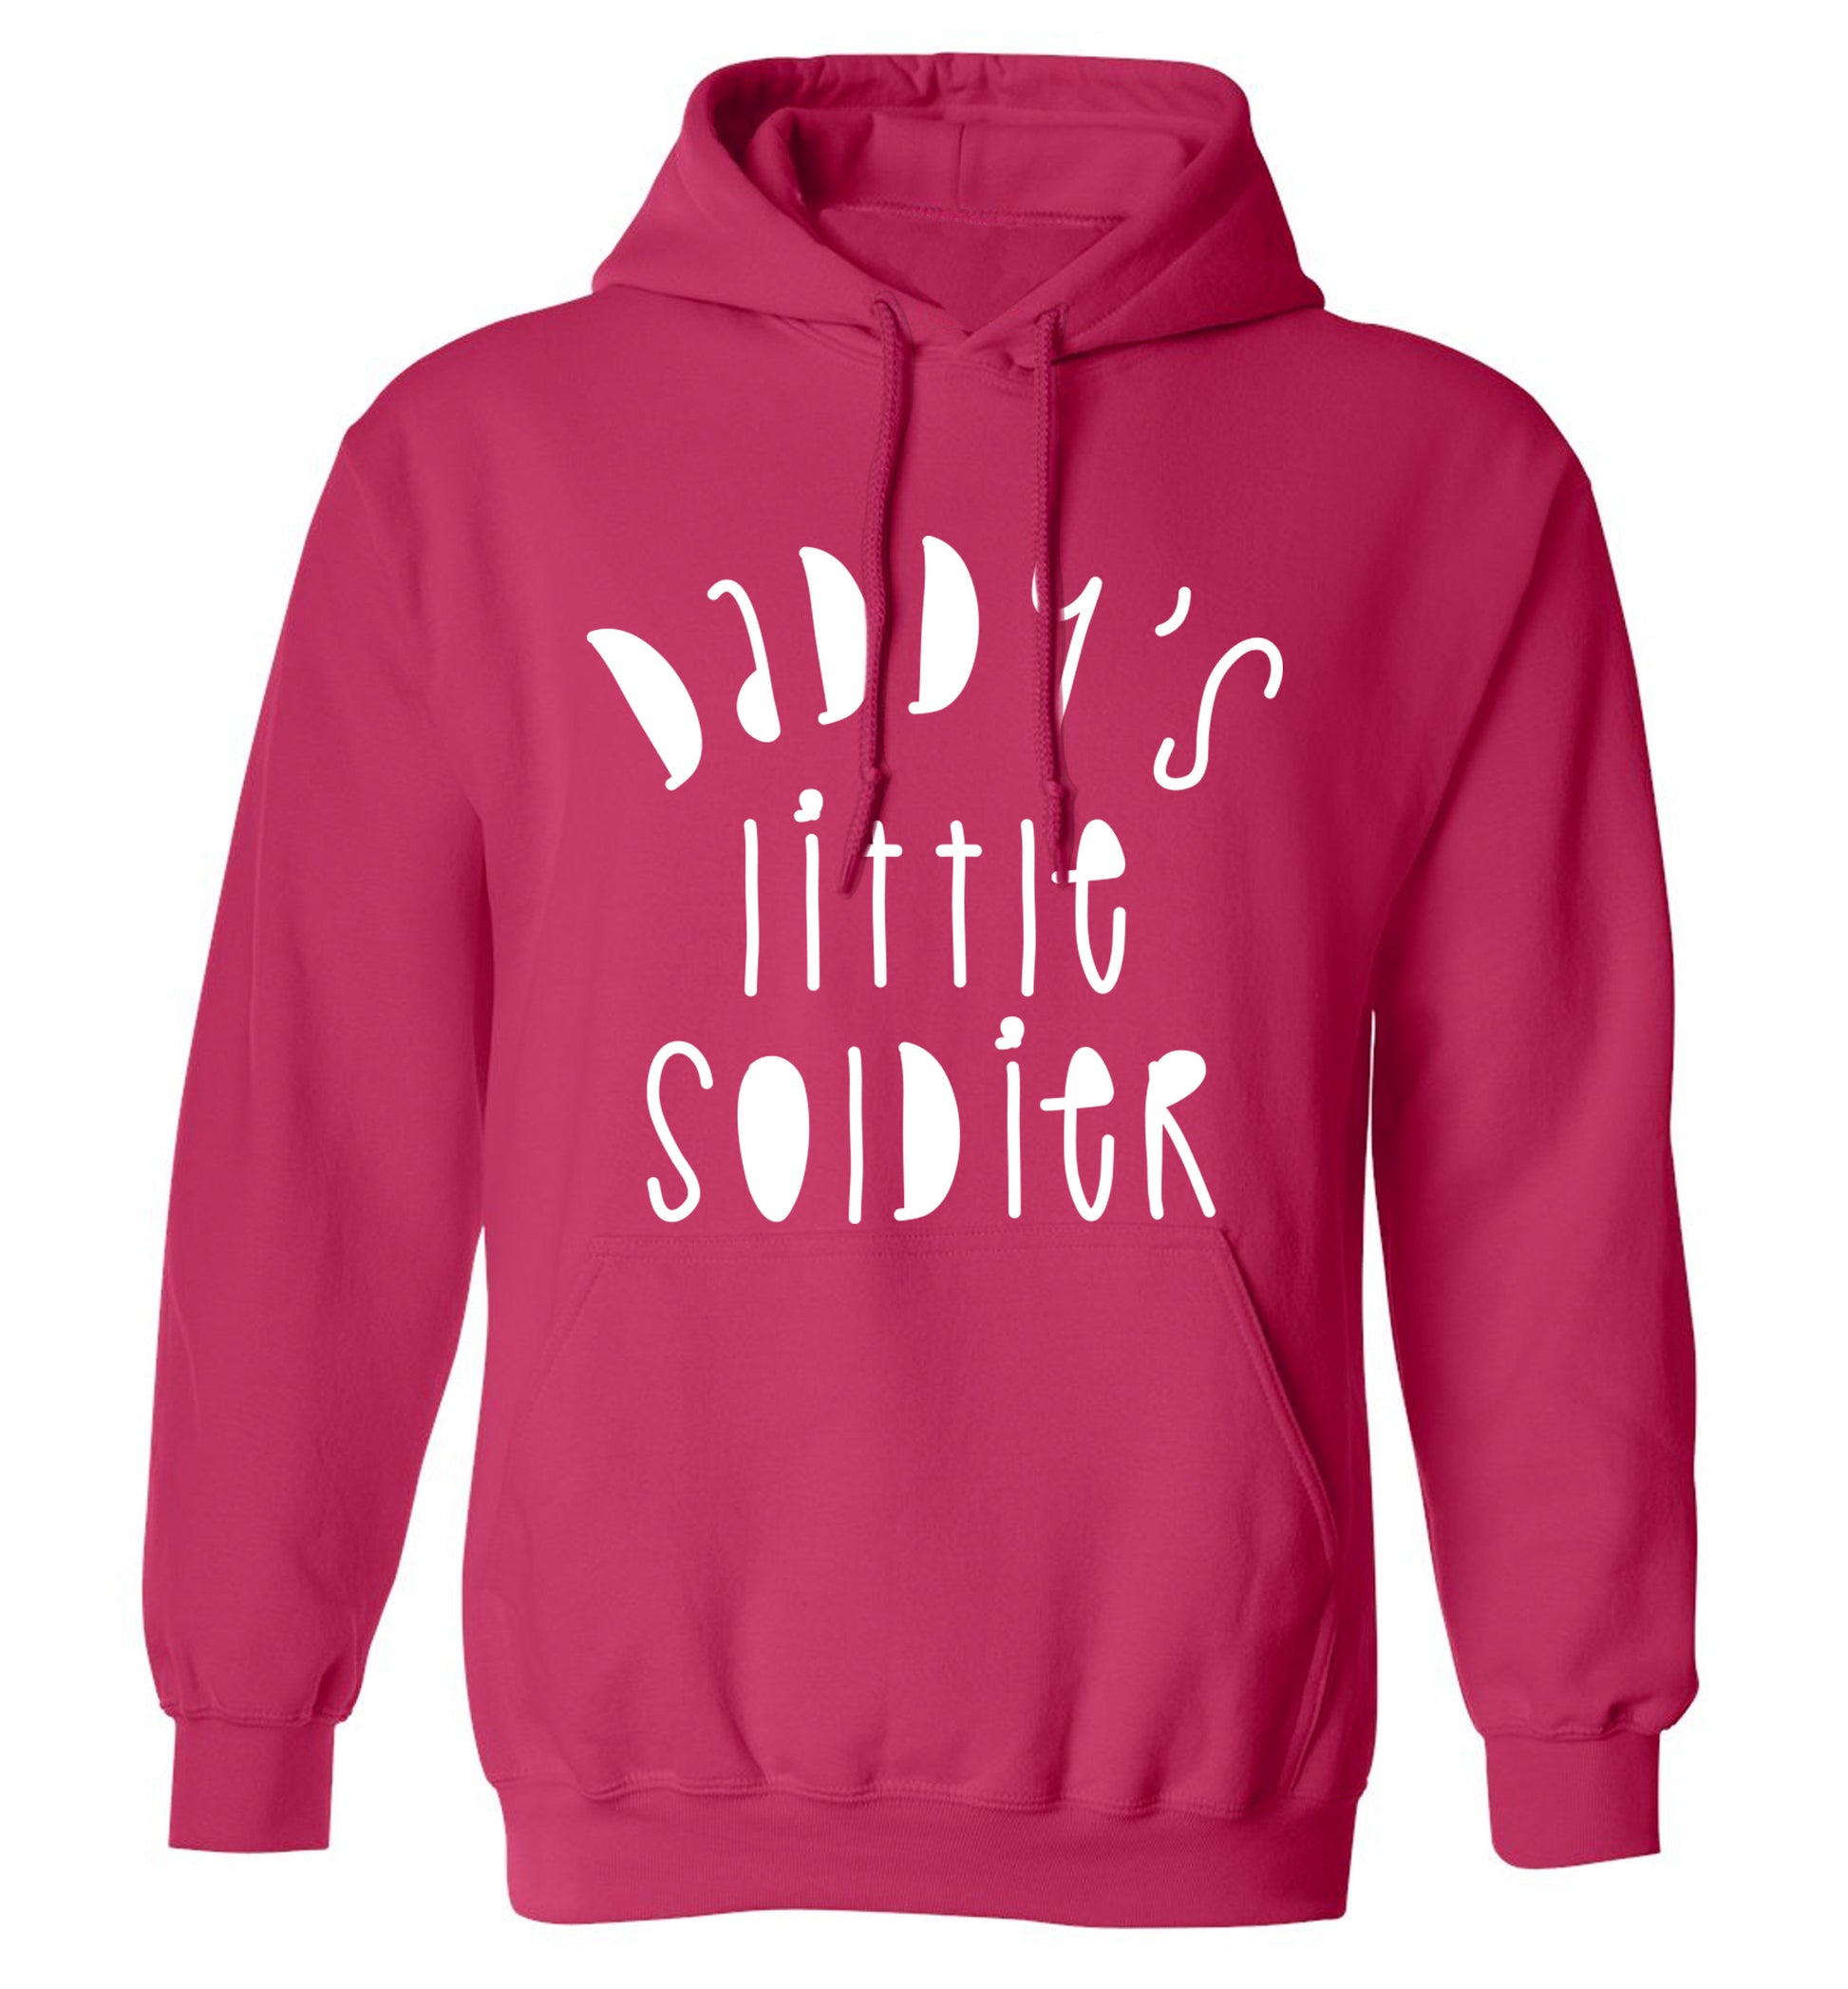 Daddy's little soldier adults unisex pink hoodie 2XL